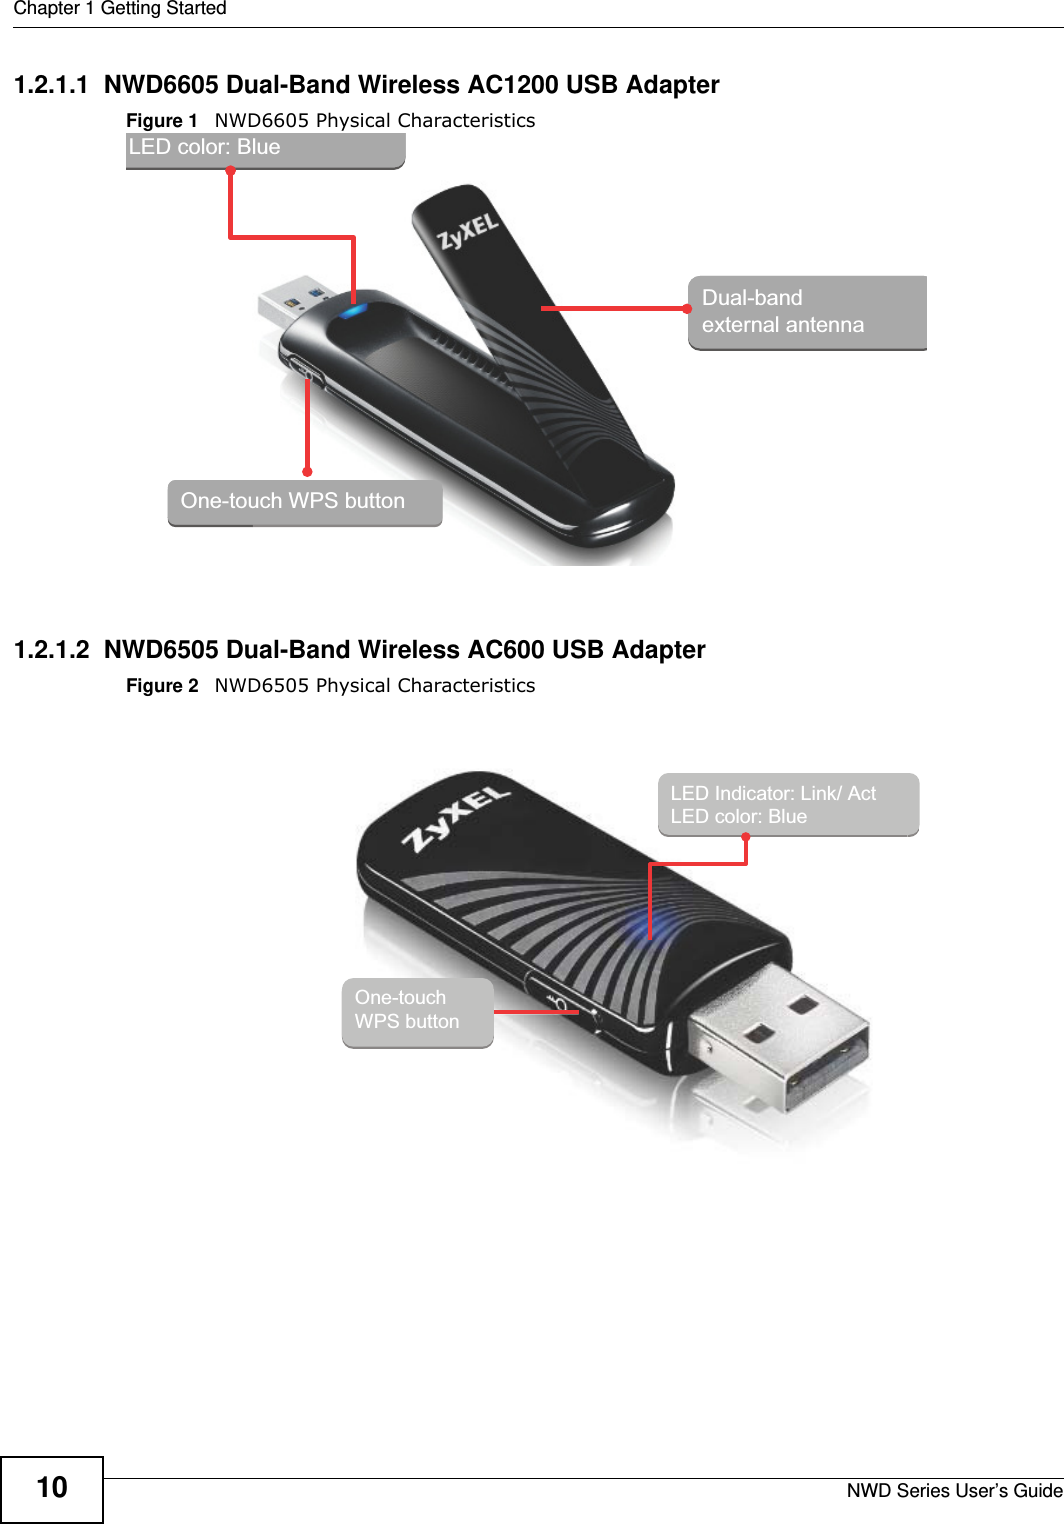 Chapter 1 Getting StartedNWD Series User’s Guide101.2.1.1  NWD6605 Dual-Band Wireless AC1200 USB AdapterFigure 1   NWD6605 Physical Characteristics1.2.1.2  NWD6505 Dual-Band Wireless AC600 USB AdapterFigure 2   NWD6505 Physical CharacteristicsLED color: BlueLED color: BlueDual-band external antennaDual-band external antennaOne-touch WPS buttonOne-touch WPS buttonLED color: BlueLEDcolor:BlueLLLEEEDDDcccooolllooorrr:::BBBllluuueeeLED color: BlueDual-band external antennaDual-bandexternalantennaDDDuuuaaalll-bbbaaannndddeeexxxttteeerrrnnnaaalllaaannnttteeennnnnnaaaDual-band external antennaOne-touch WPS buttonOne-touOOOnnneee-tttooouuuuchWPSbuttonOne-touch WPS buttonLED Indicator: Link/ ActLED color: BlueLEDIndicator:Link/ActLEDcolor:BlueLED Indicator: Link/ ActLED color: BlueOne-touch WPS buttonOne-touchWPSbuttonOne-touch WPS button